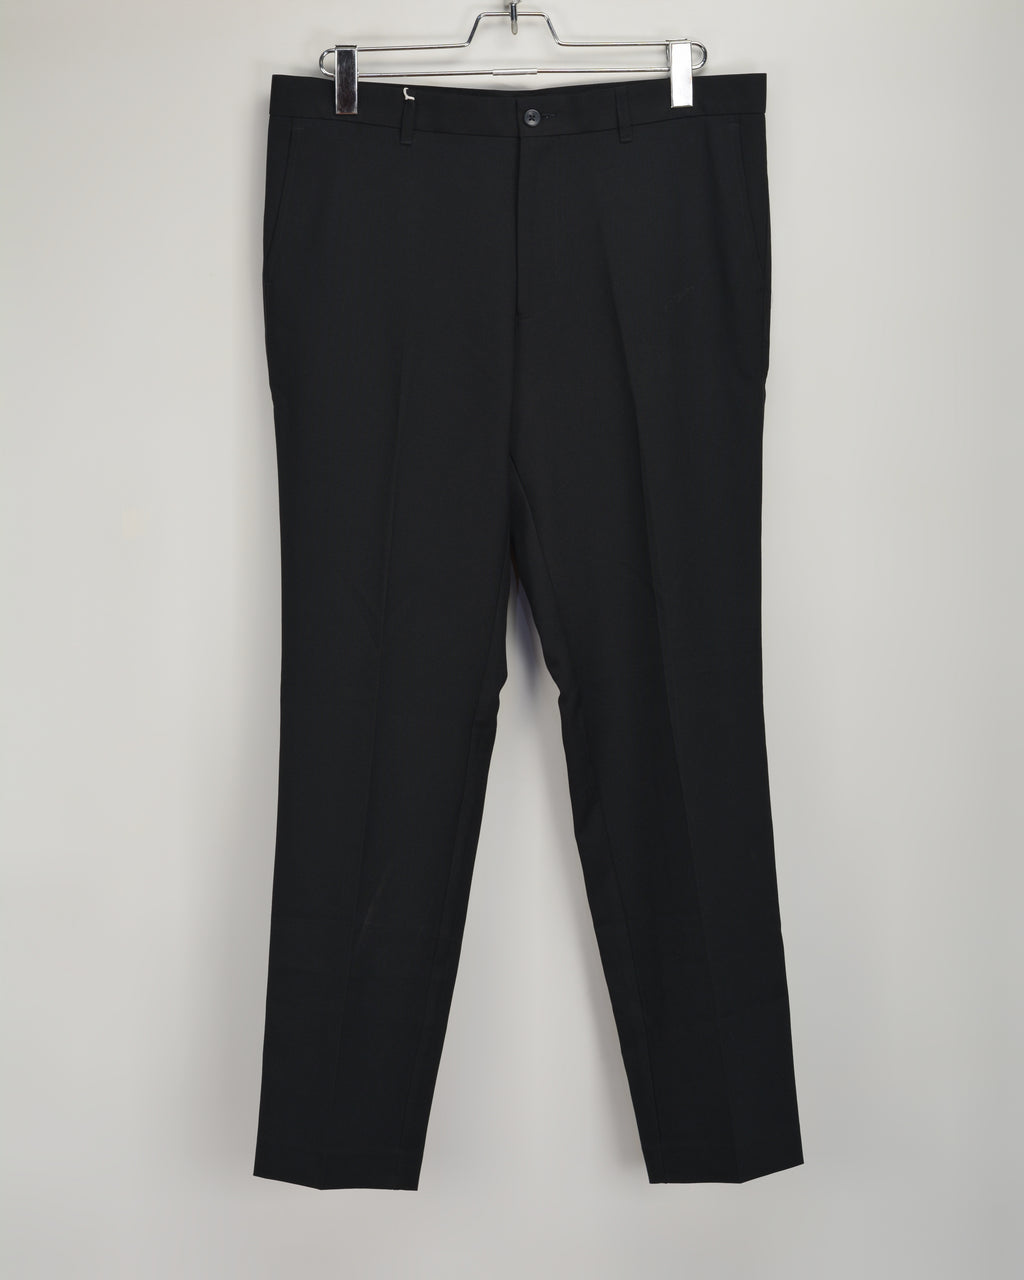 M&S COLLECTION  Big & Tall Regular Fit Flat Front Trousers Black